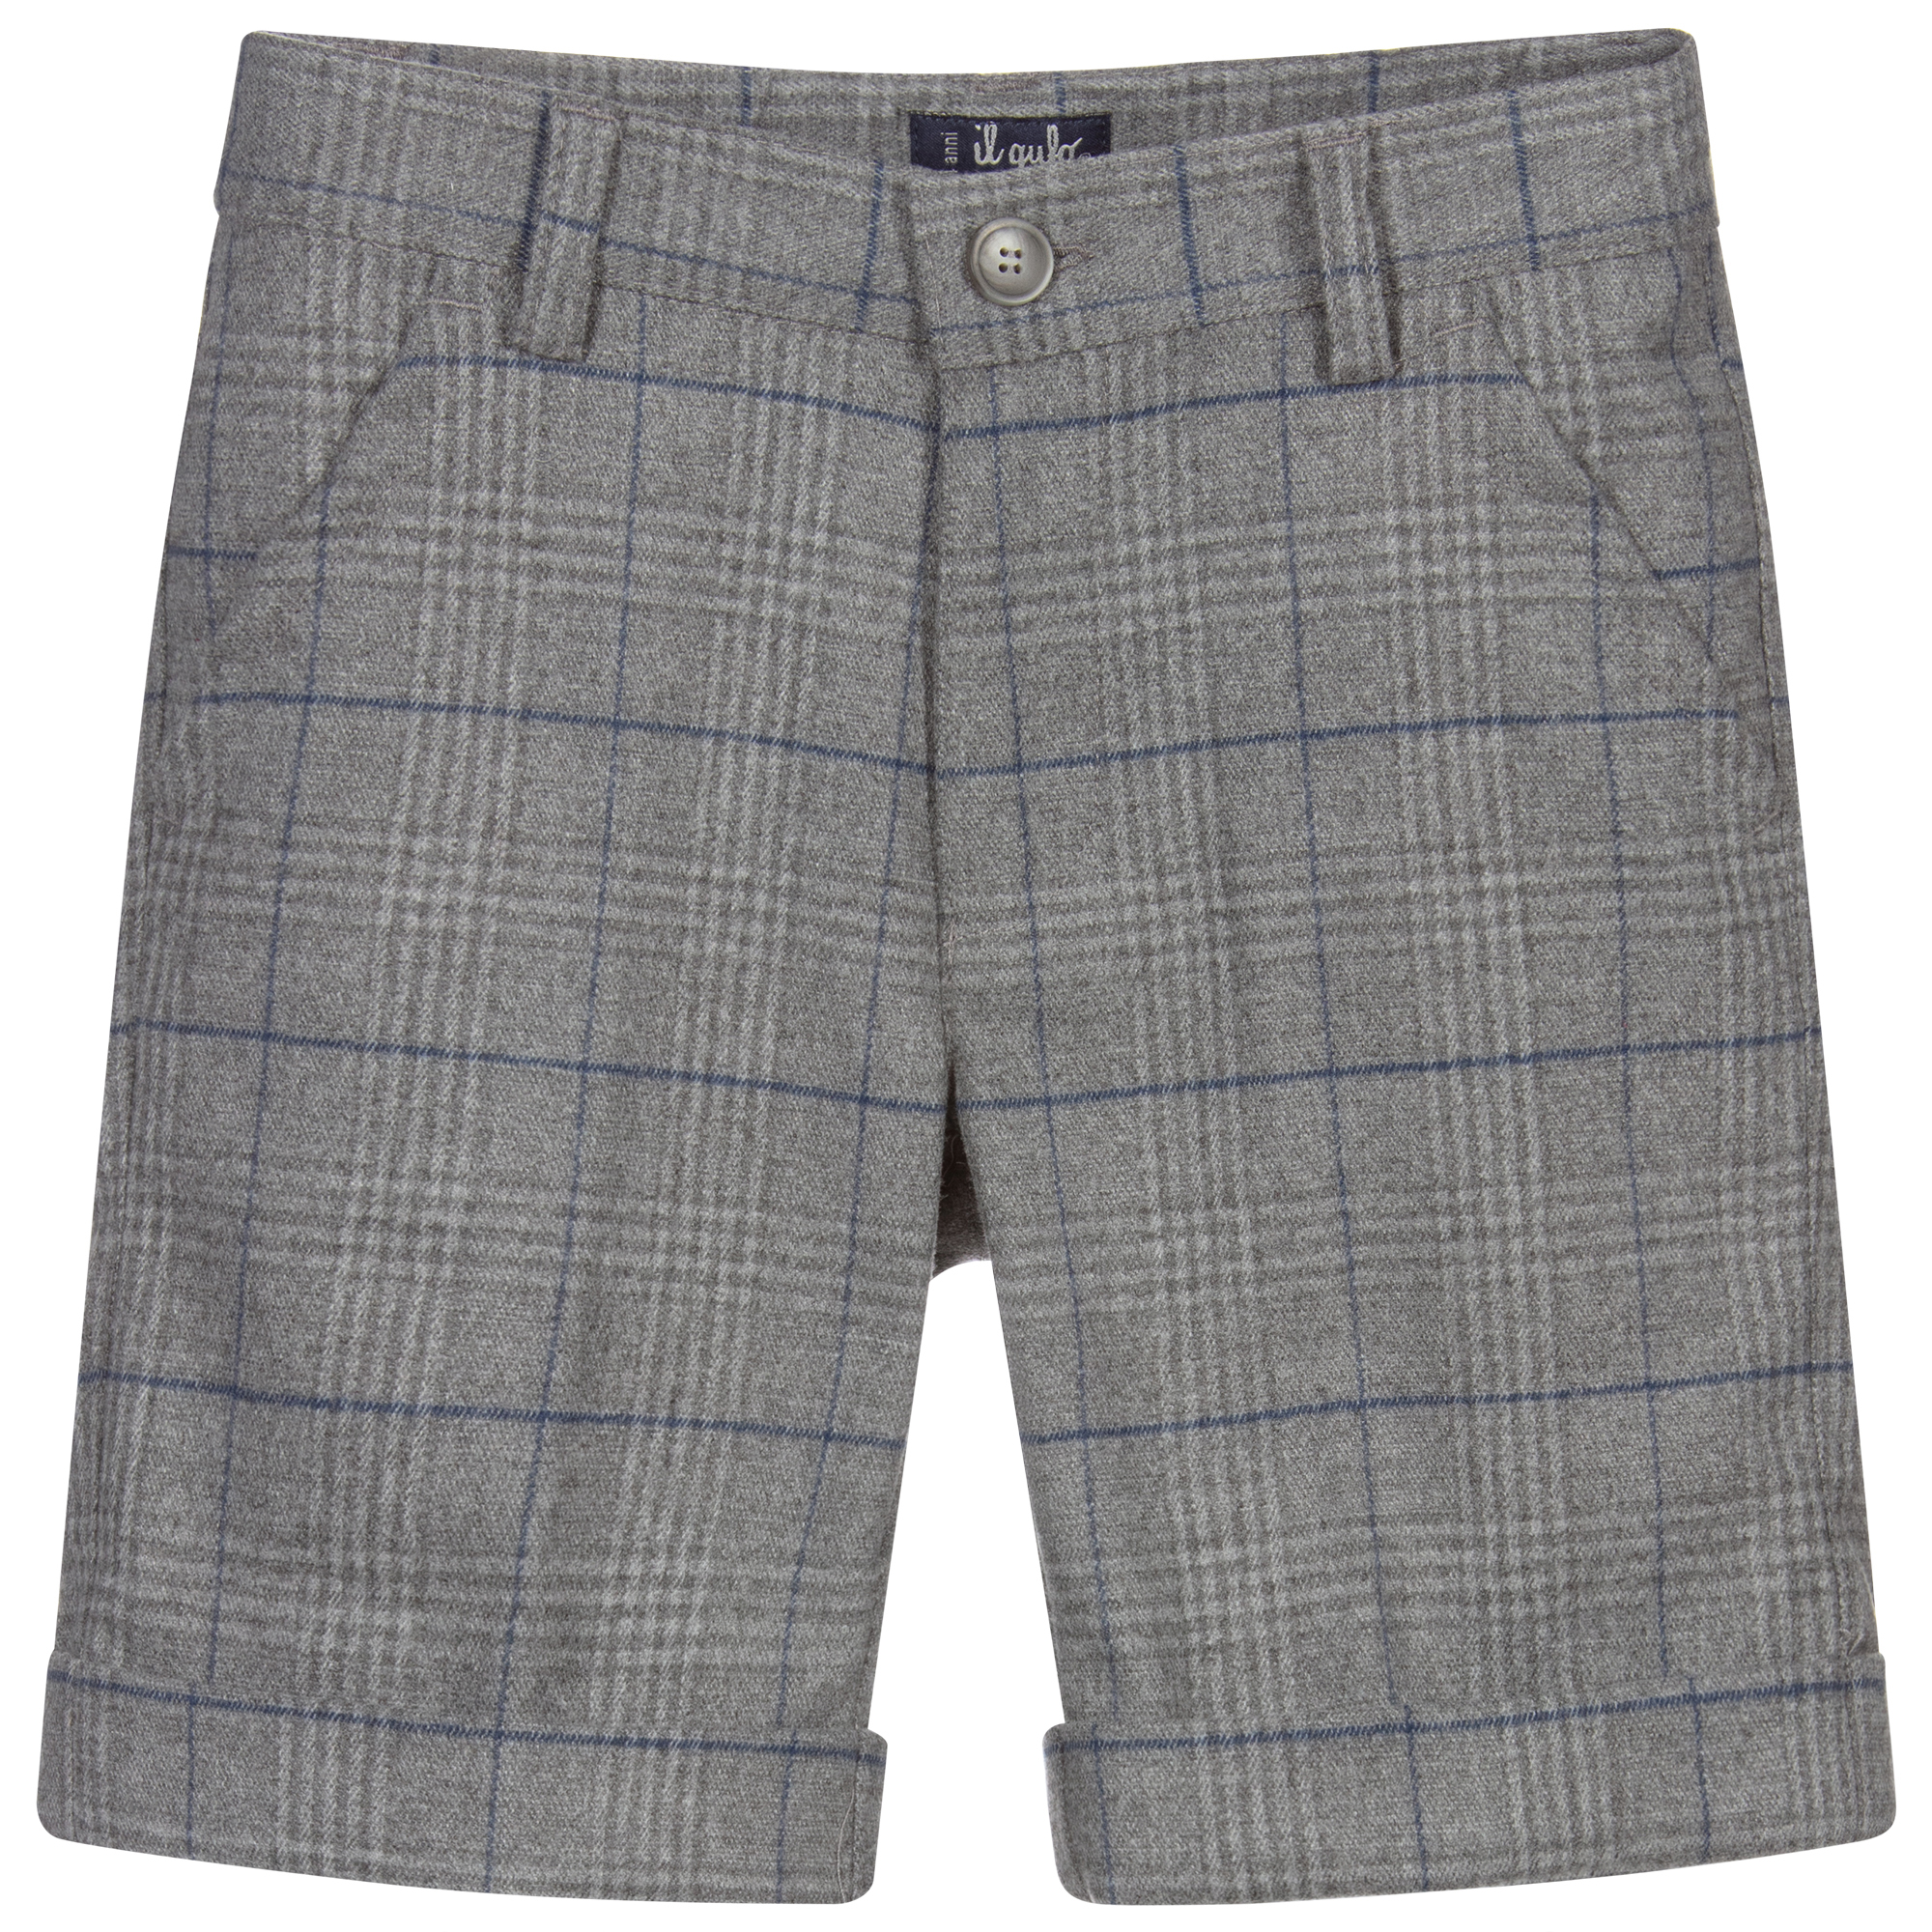 Flannel Shorts